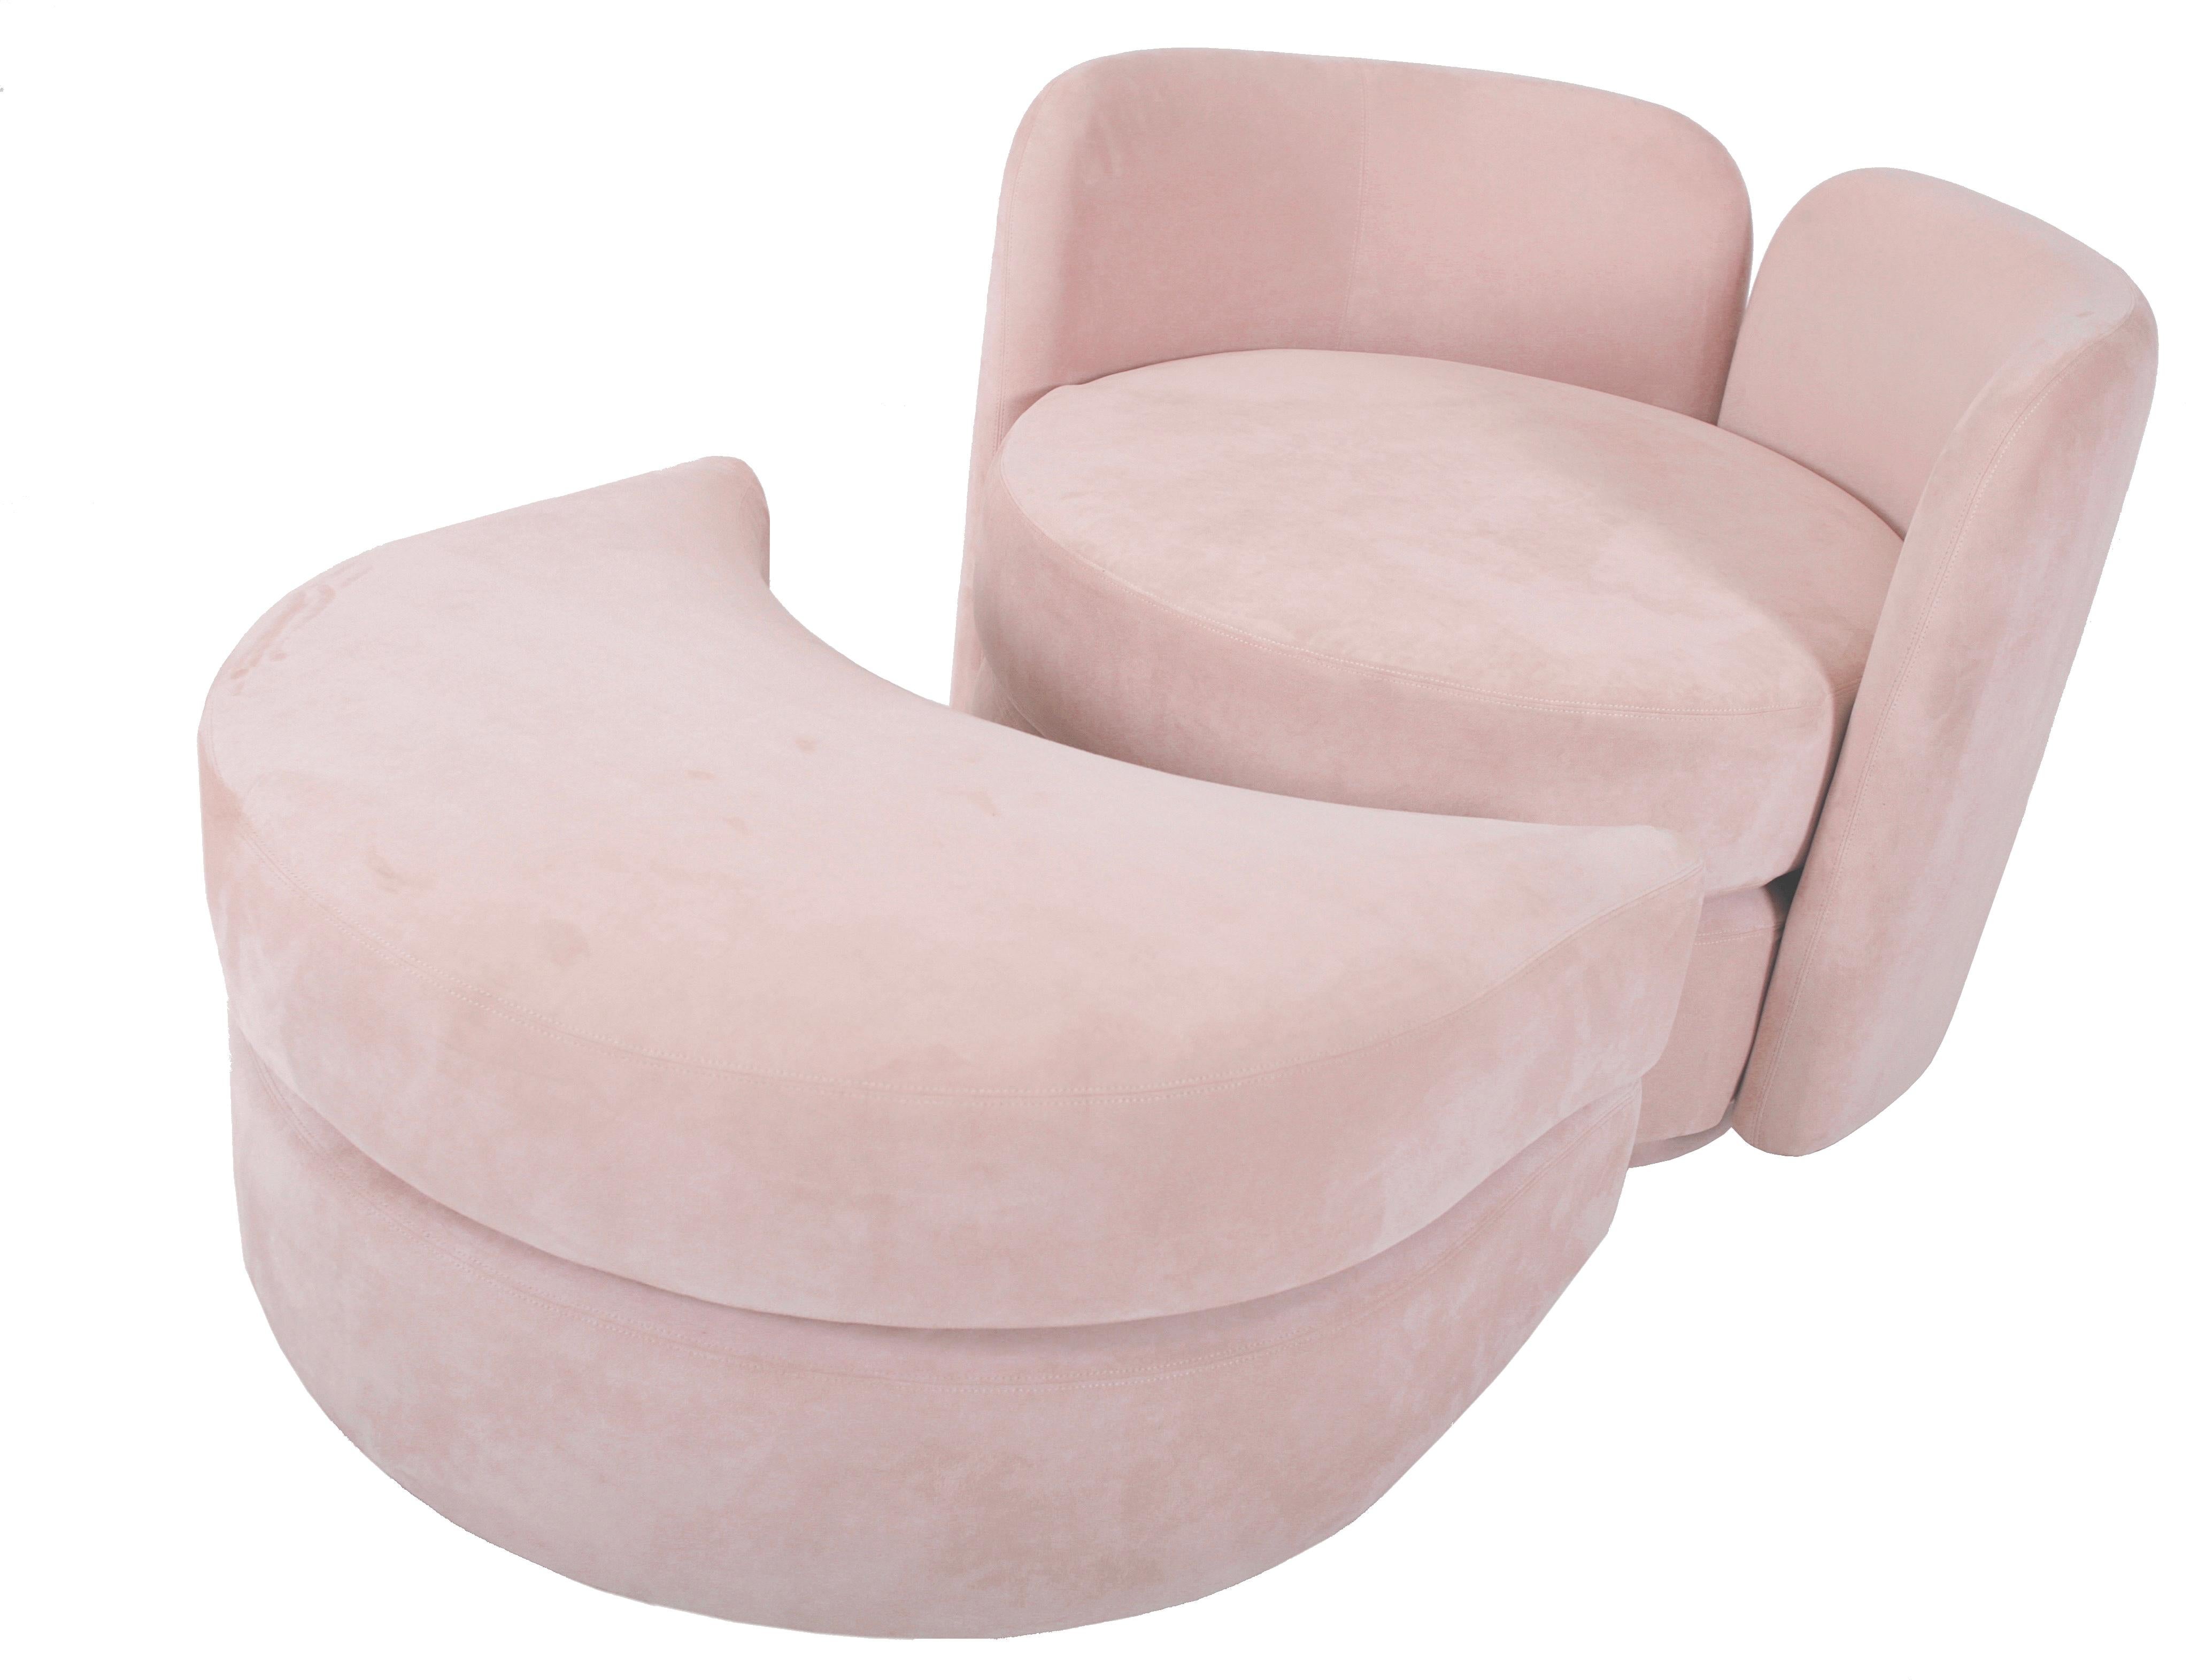 Large scale swivel chair with split back and rolling ottoman. Original pink ultra-suede fabric. Postmodern design attributed to Milo Baughman.